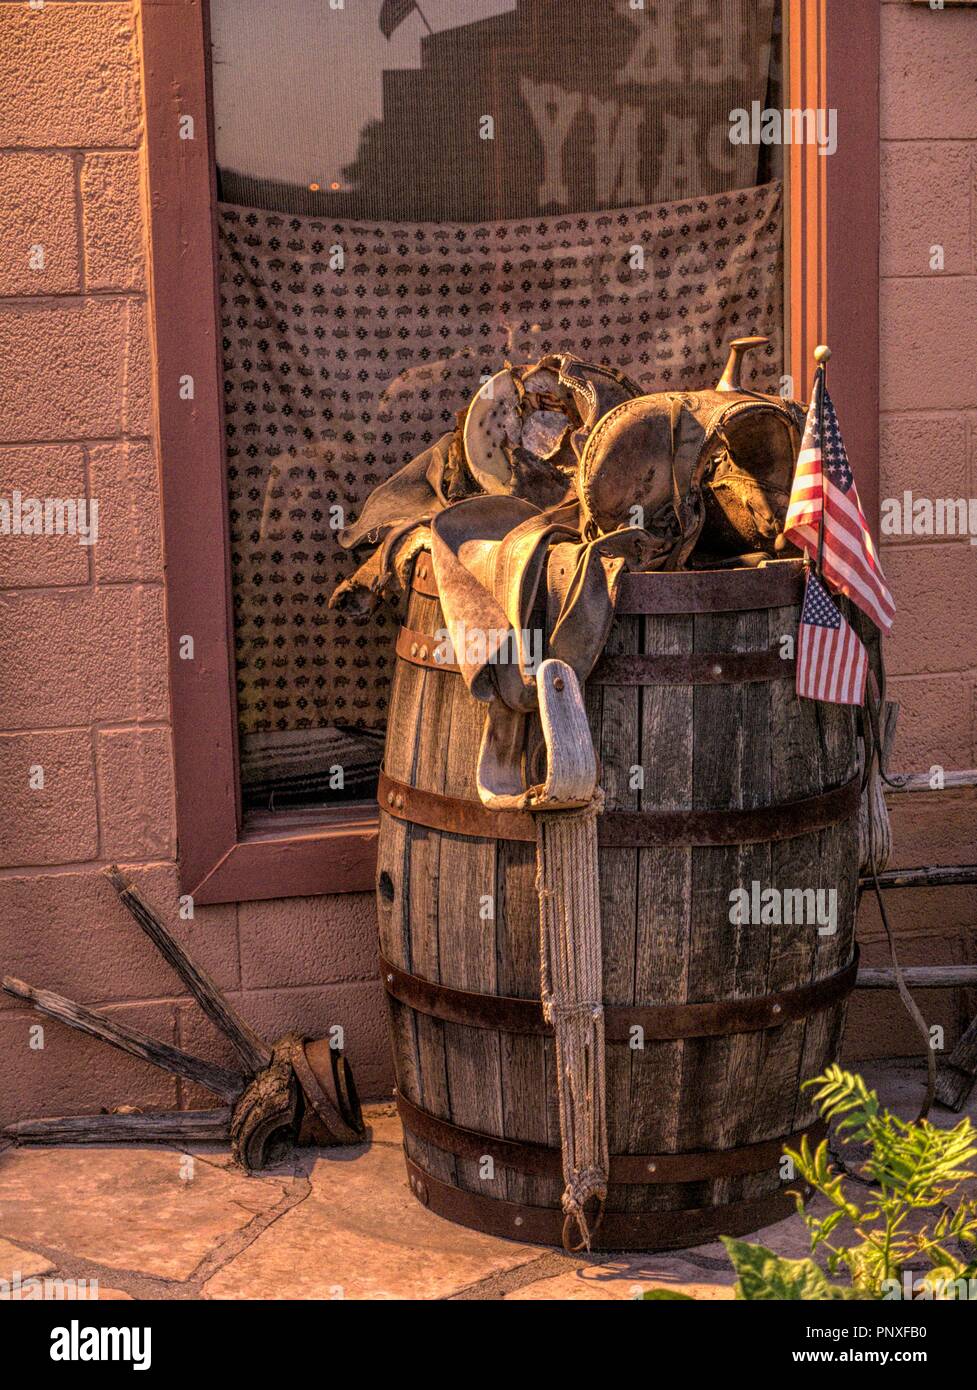 Old barrel with horse mount and flags in Sedona, Arizona. Stock Photo